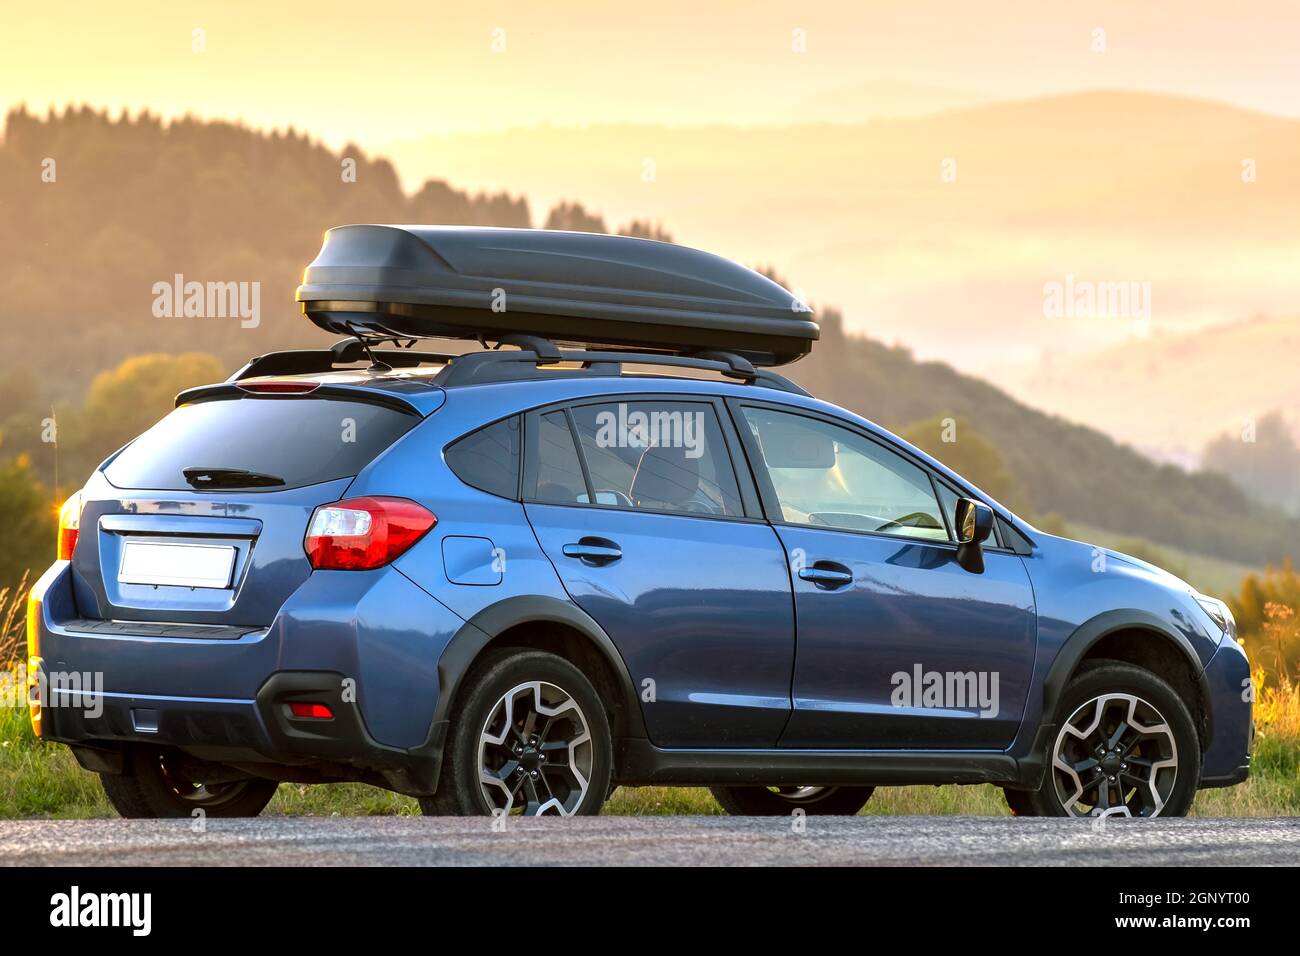 SUV car with roof rack luggage container for off road travelling parked at roadside at sunset. Stock Photo